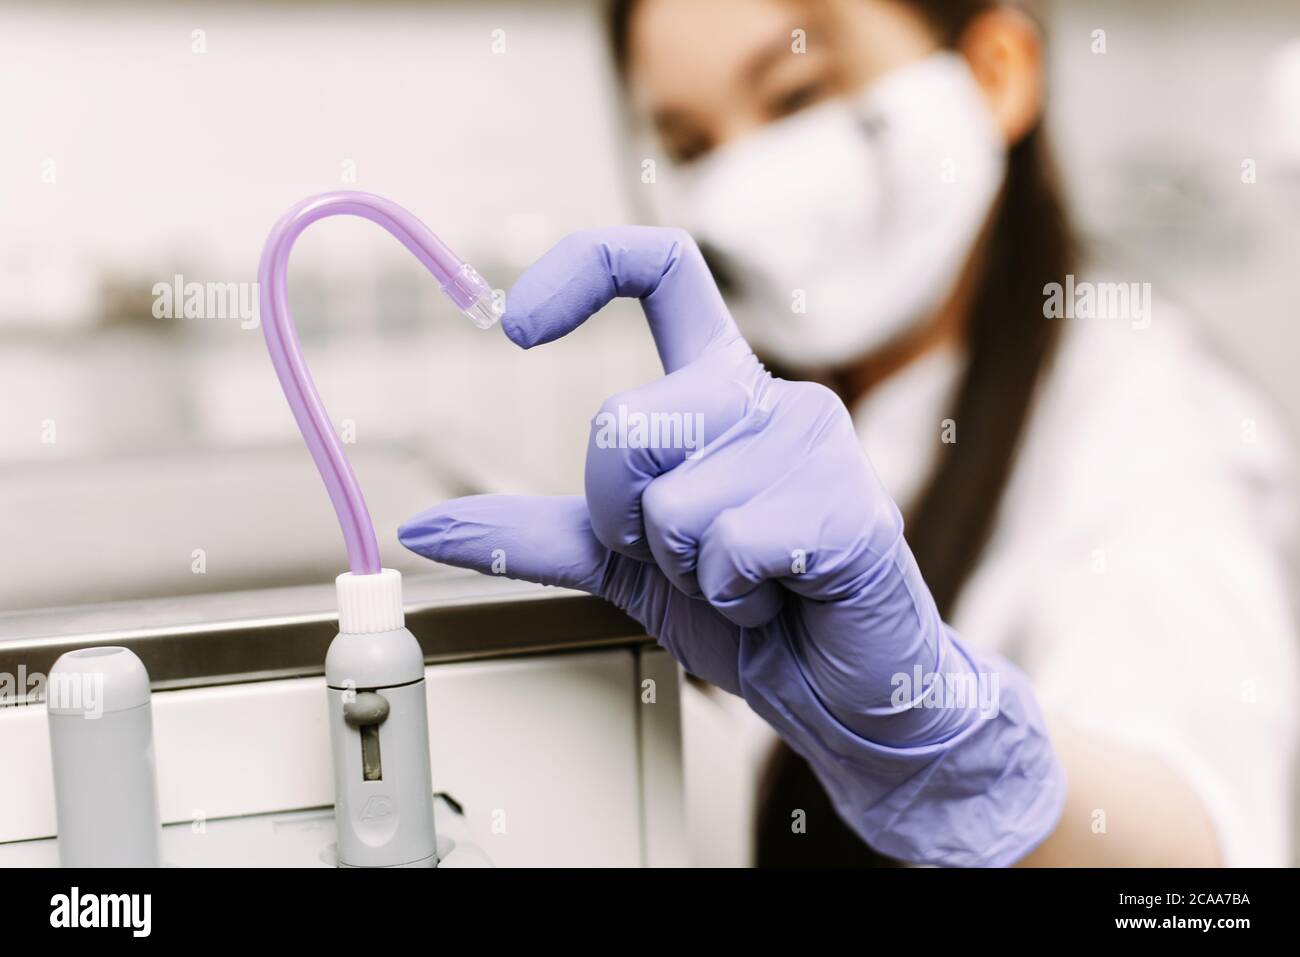 Dental treatment, healthcare and dentistry concept. The woman's hand shows the heart together with the saliva ejector. Stock Photo